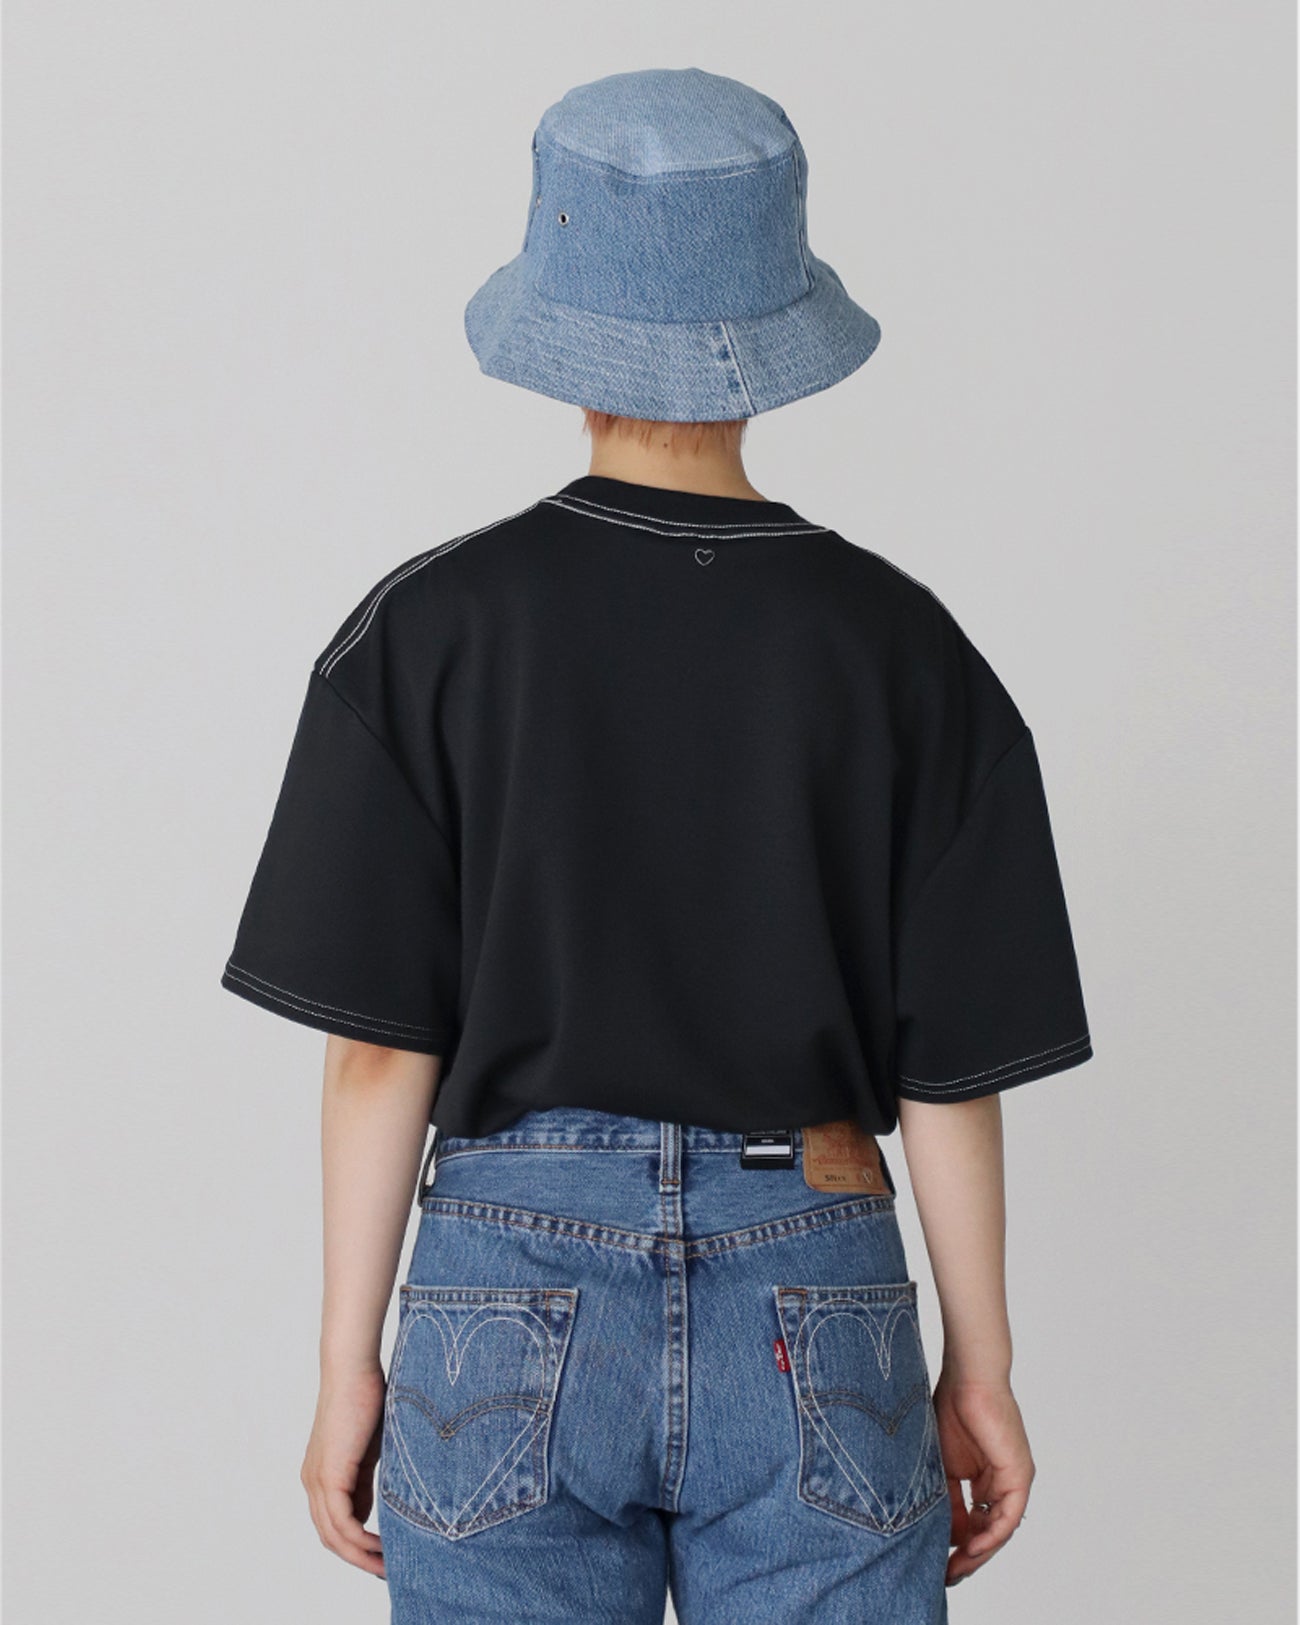 Heart Bucket hat for Sustainable Levis - used - FAB4 ONLINE STORE